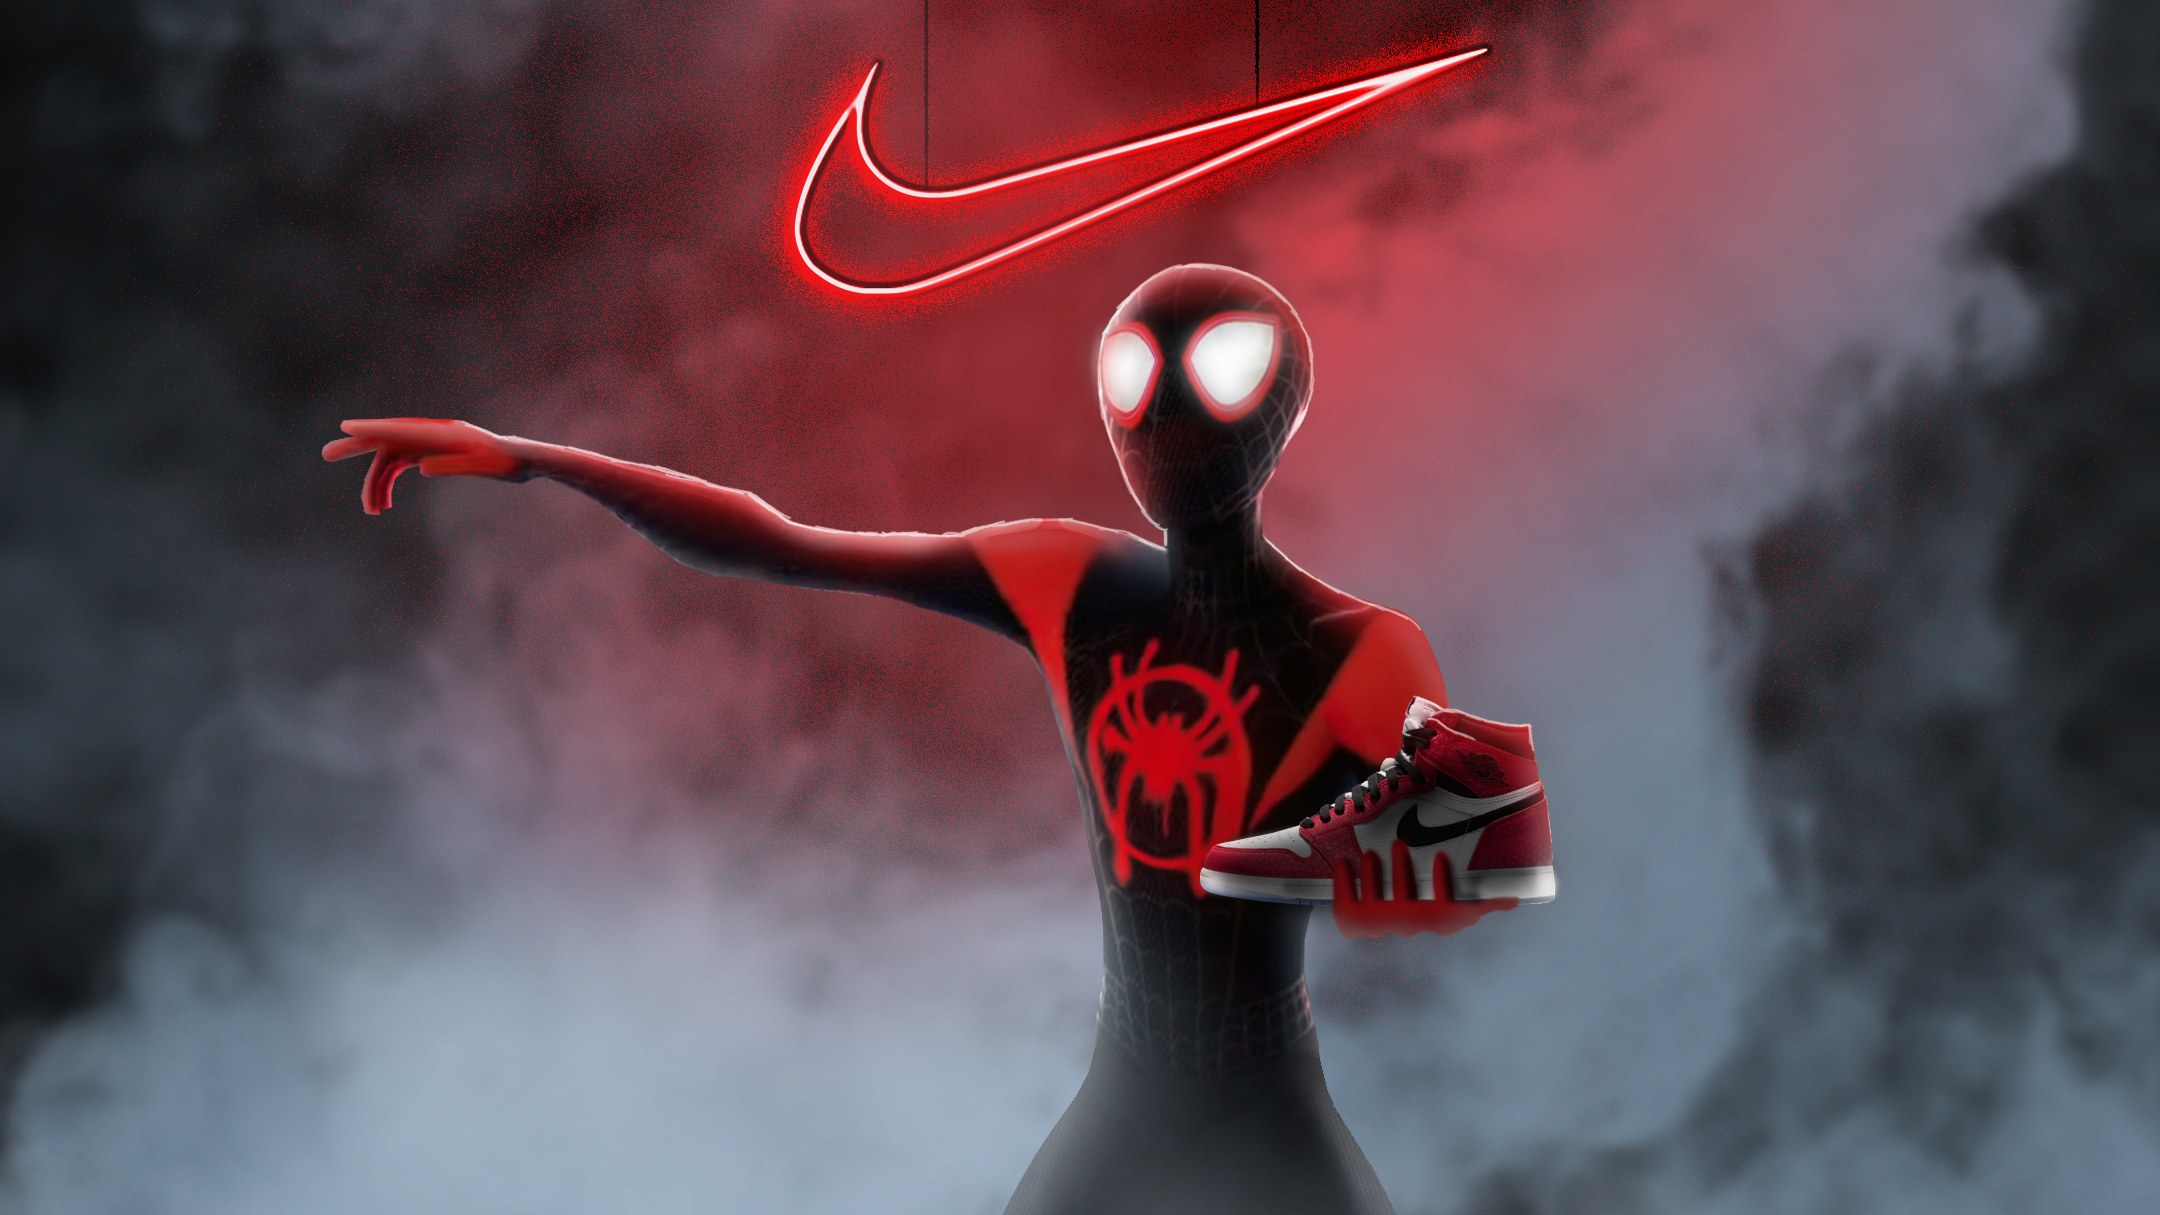 Spiderman miles morales nike air jordan hd superheroes k wallpapers images backgrounds photos and pictures